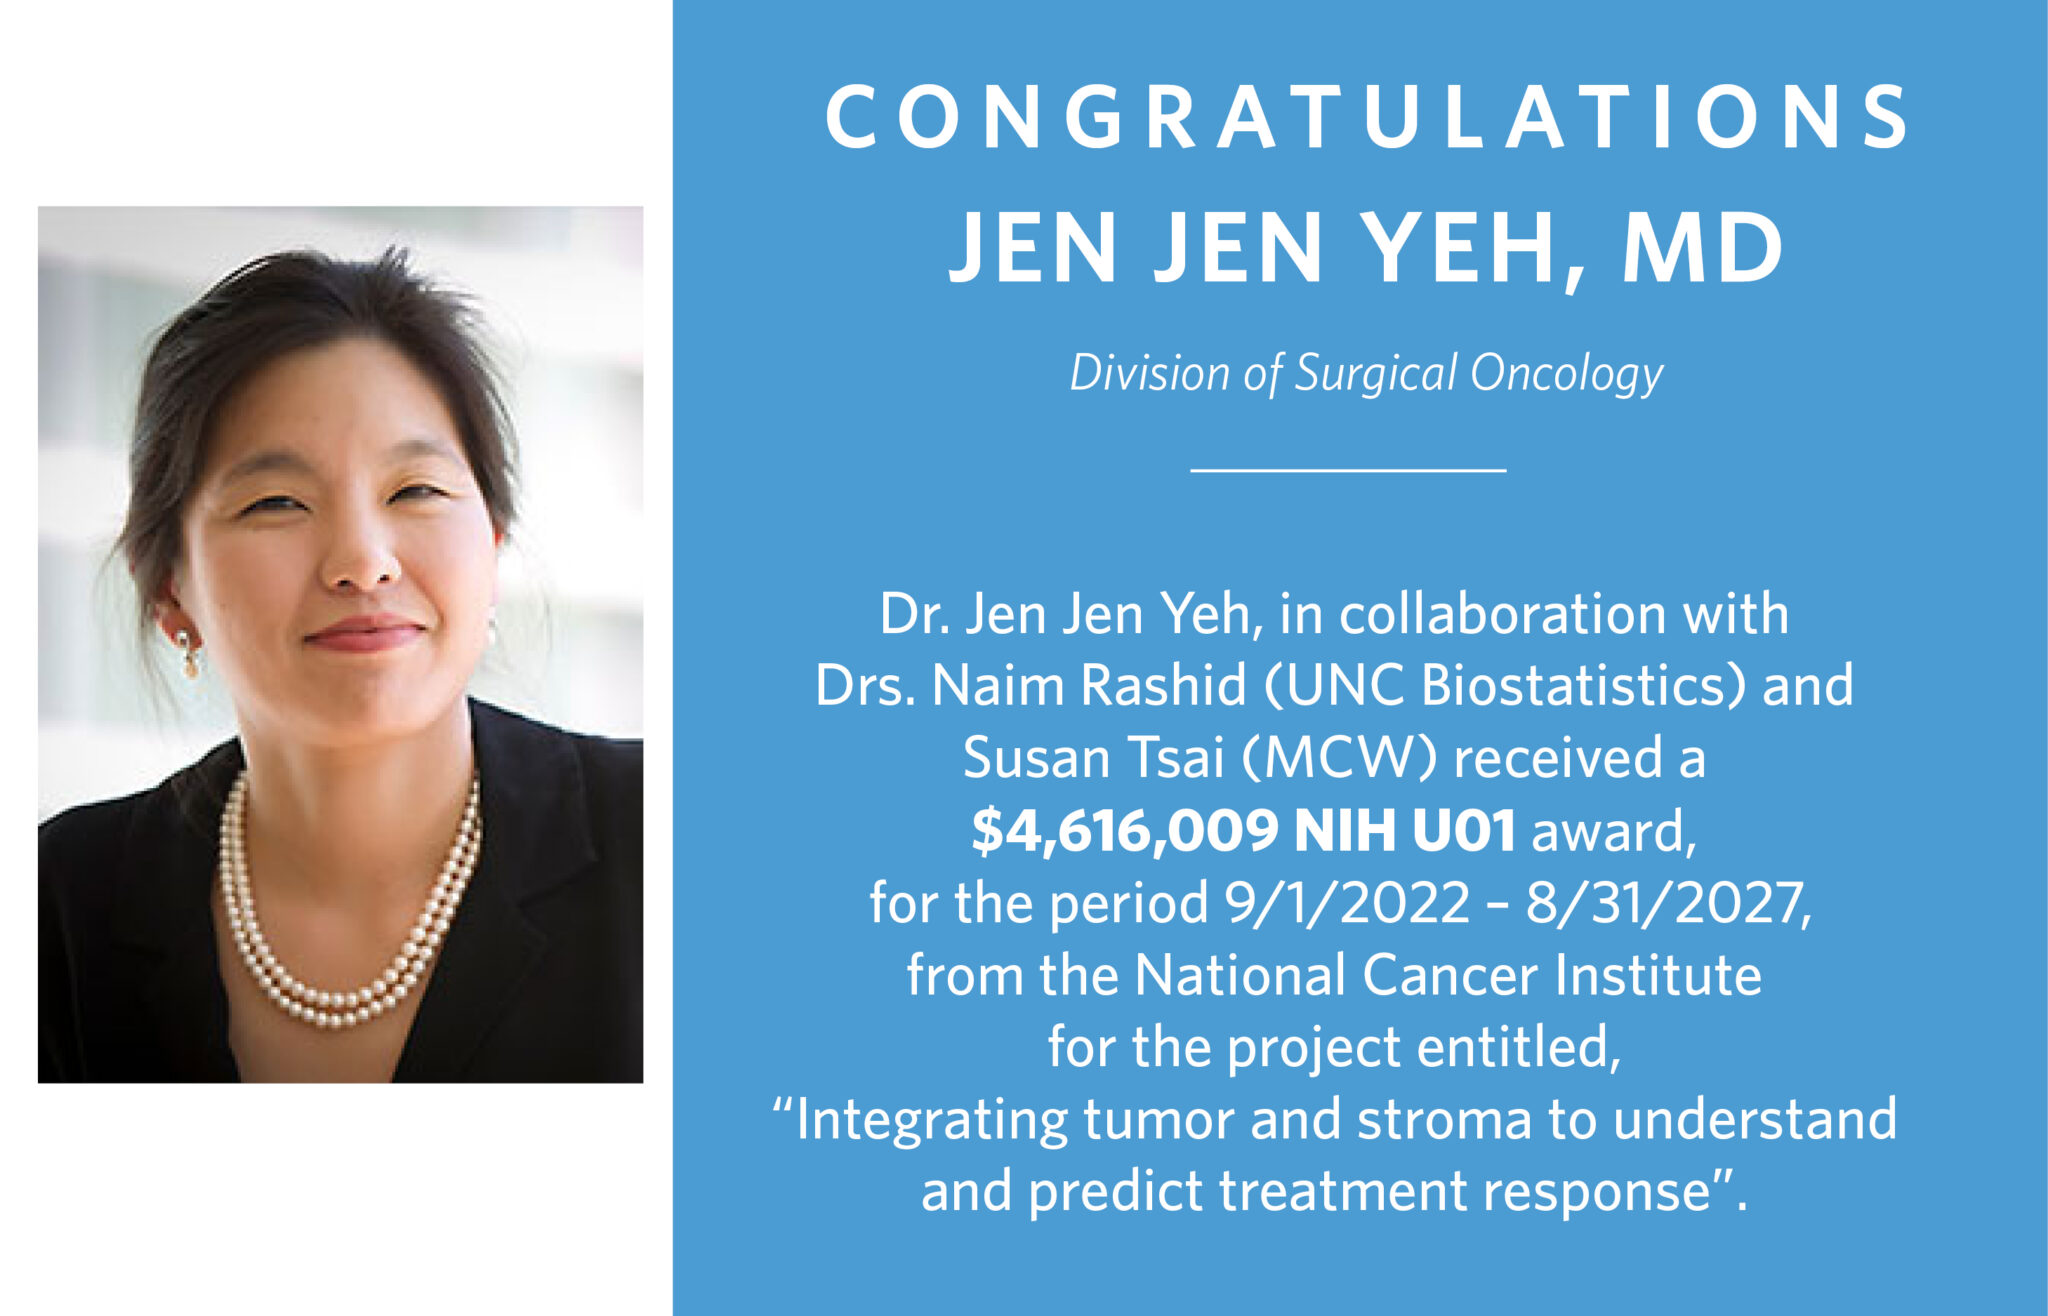 Yeh and Collaborators receive 5 year NIH U01 Award | Department of Surgery